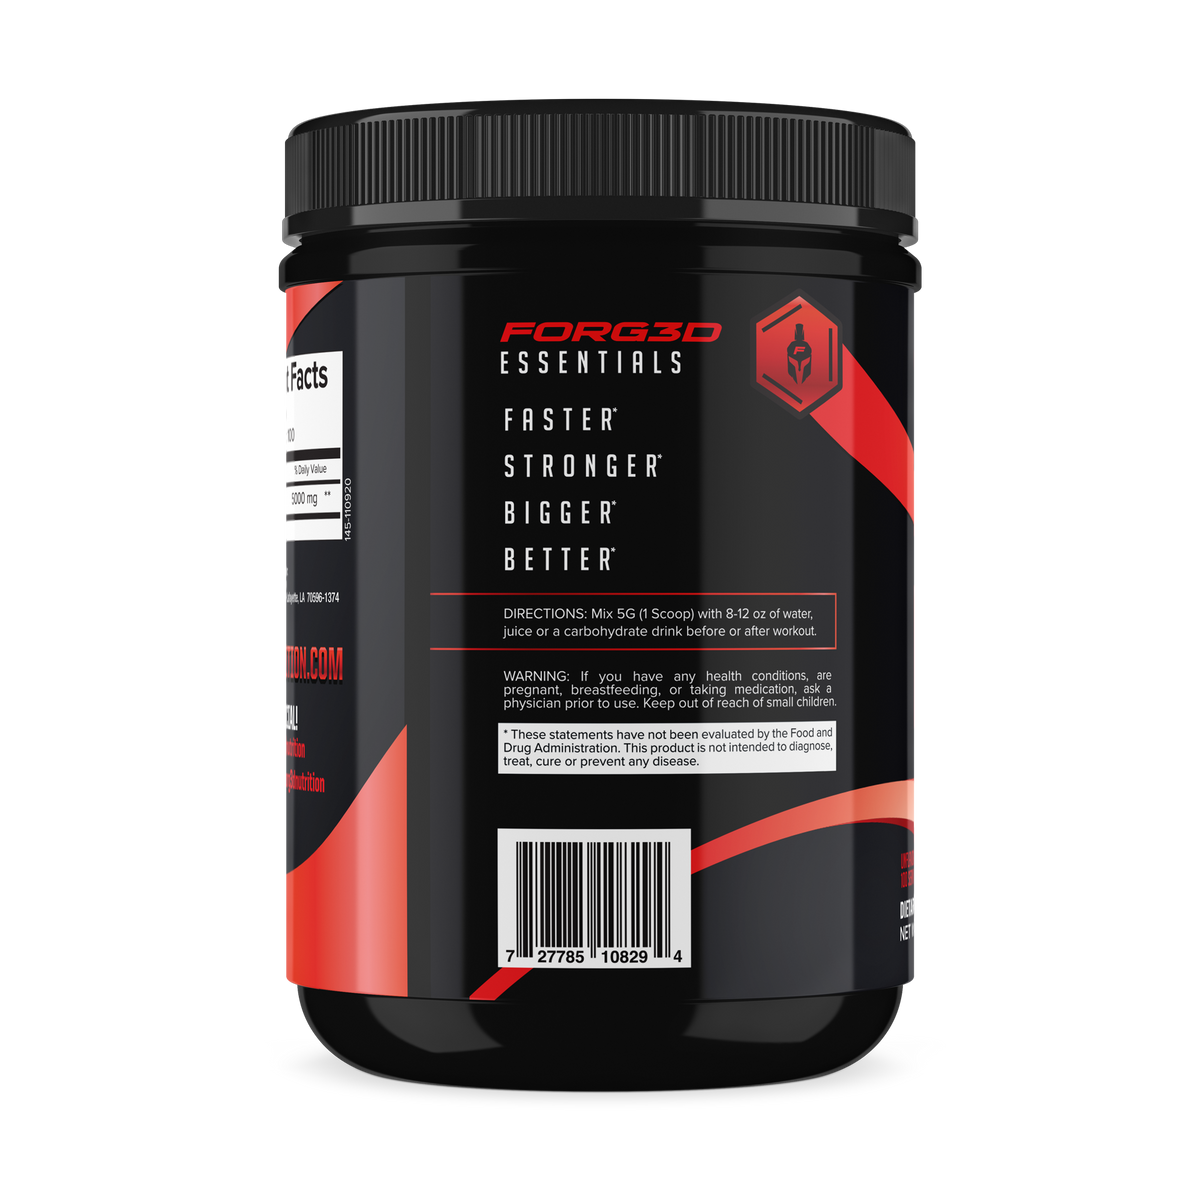 http://forg3dnutrition.com/cdn/shop/products/F0rg3d_Creatine_Side_1200x1200.png?v=1620218178